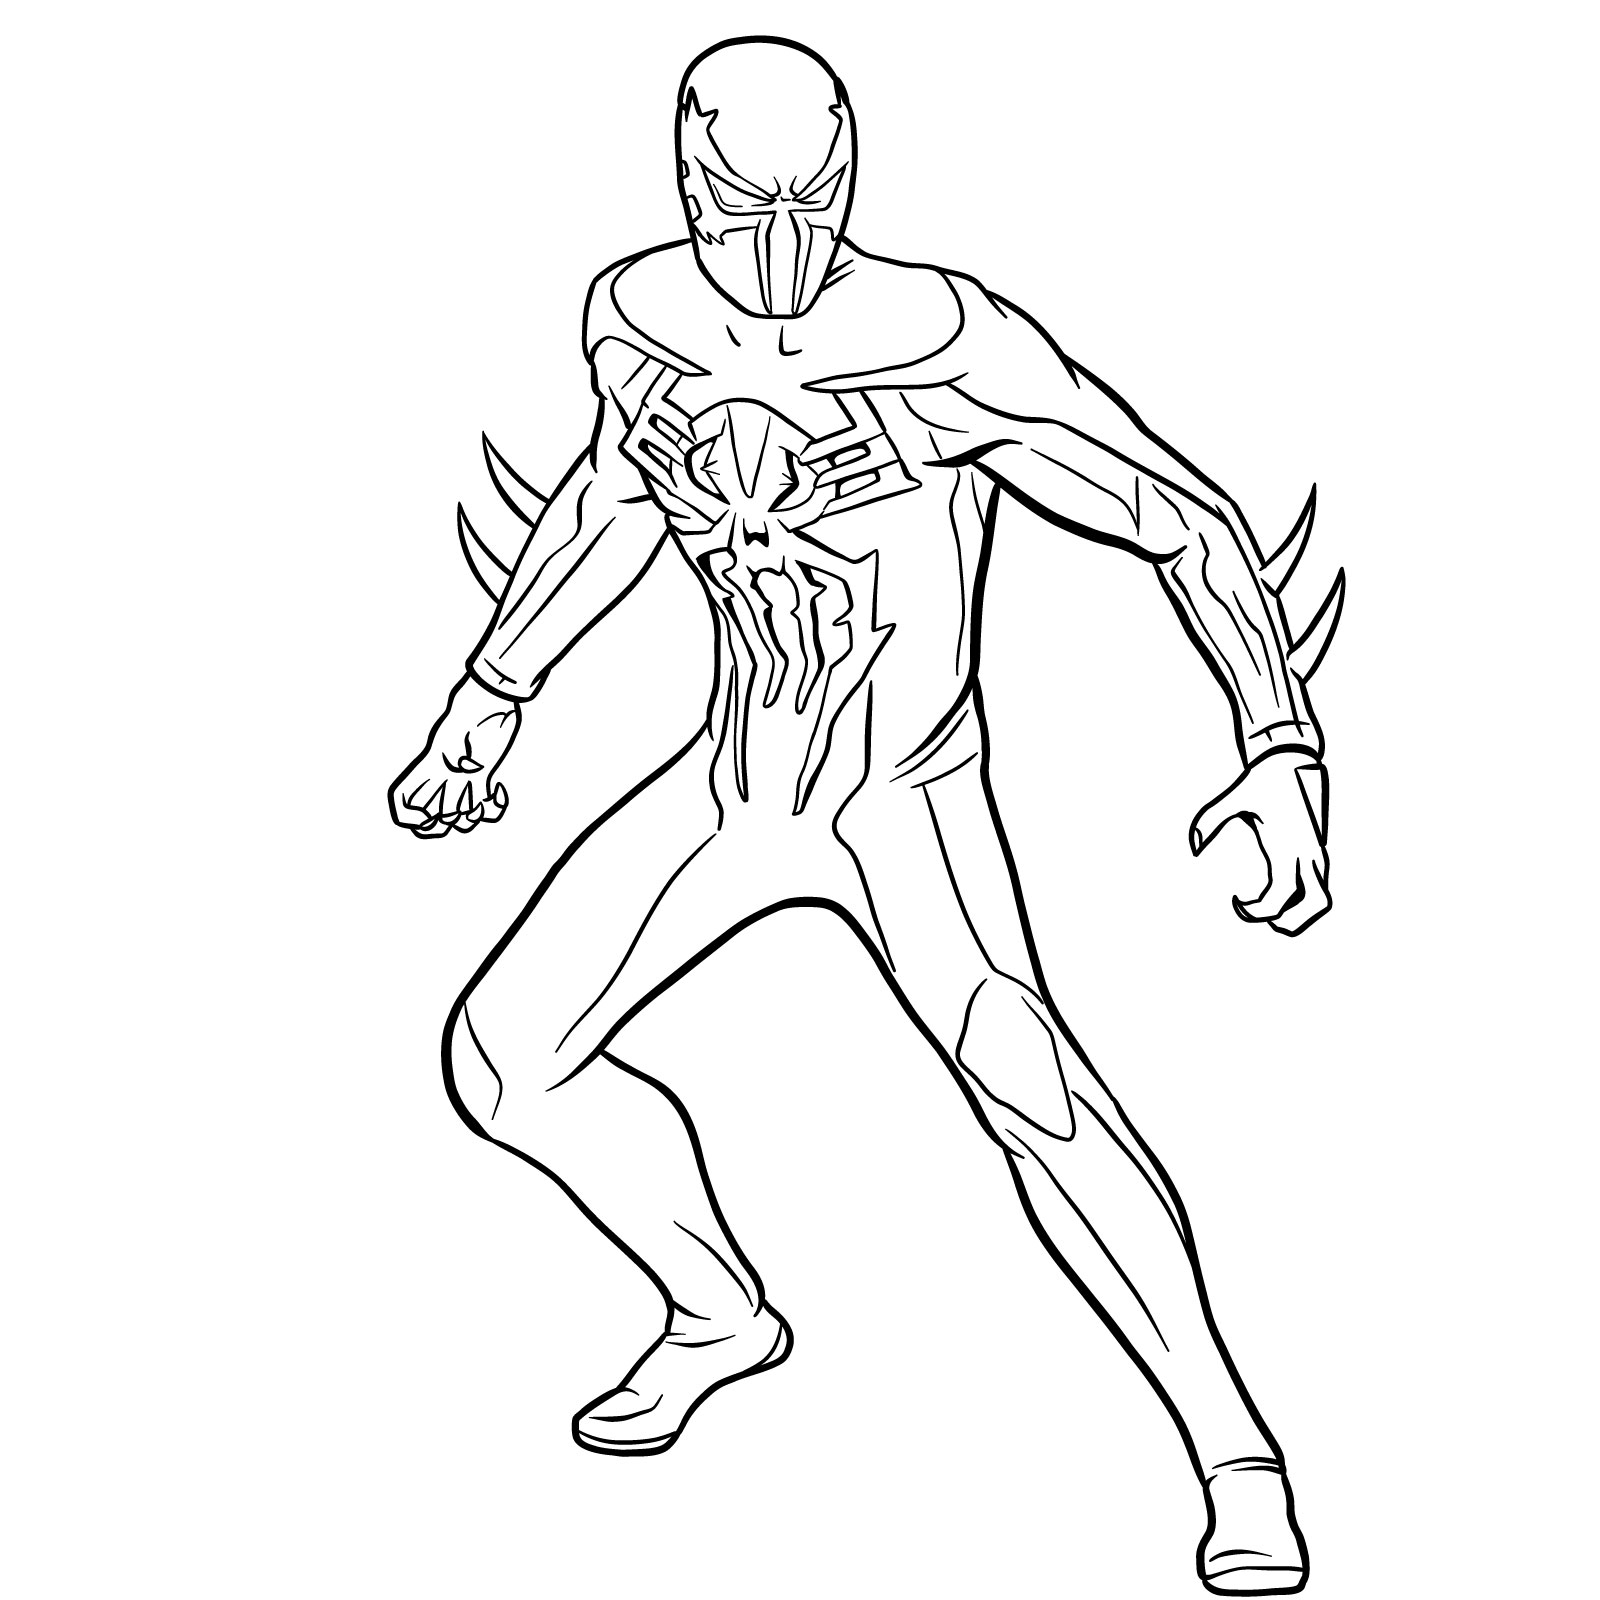 How to draw Spider-Man 2099 - step 39